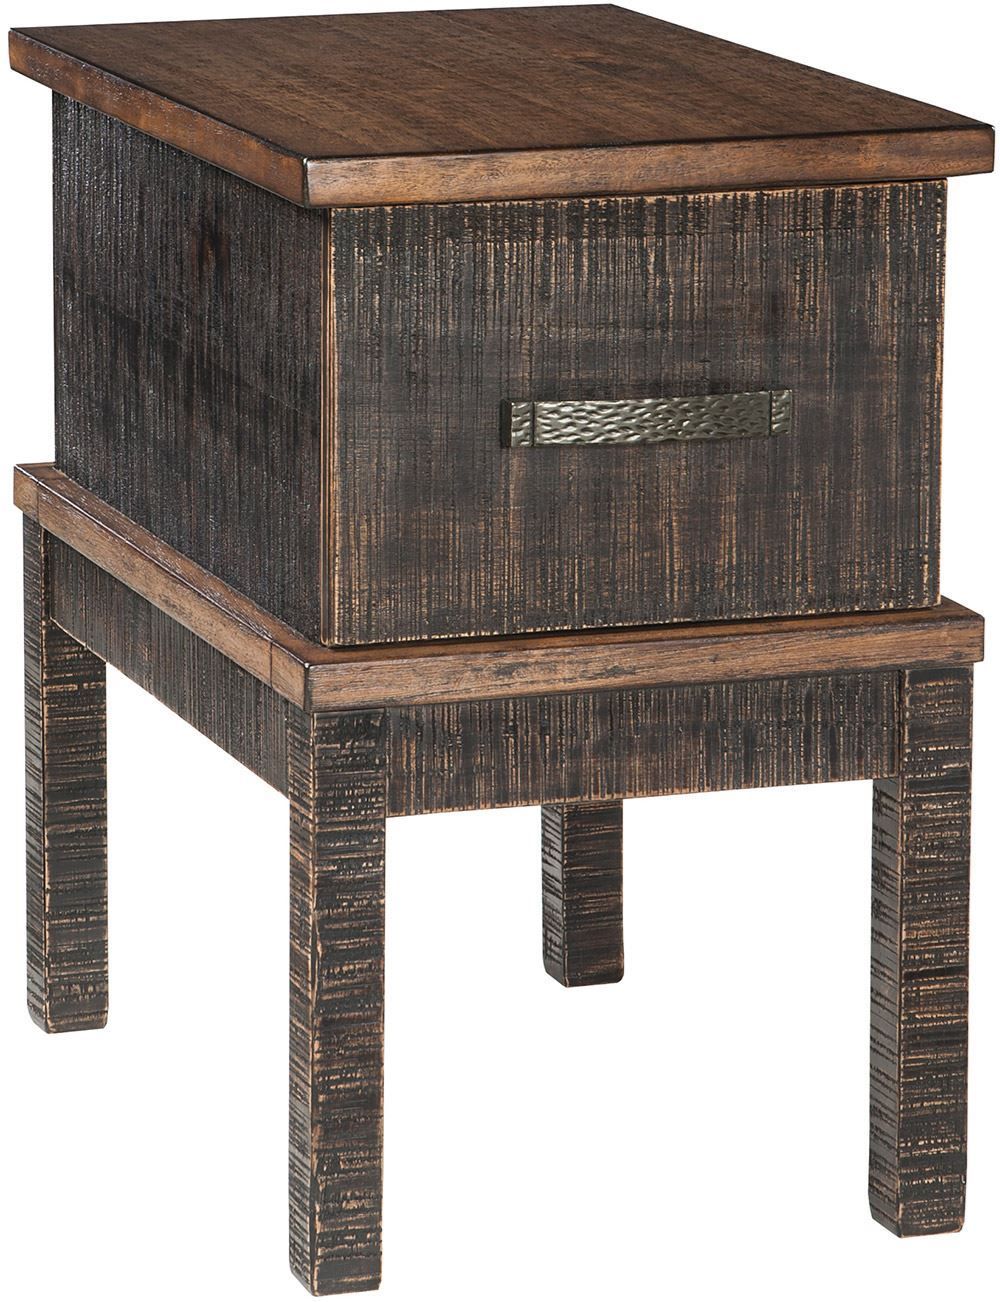 Stanah Chairside Table